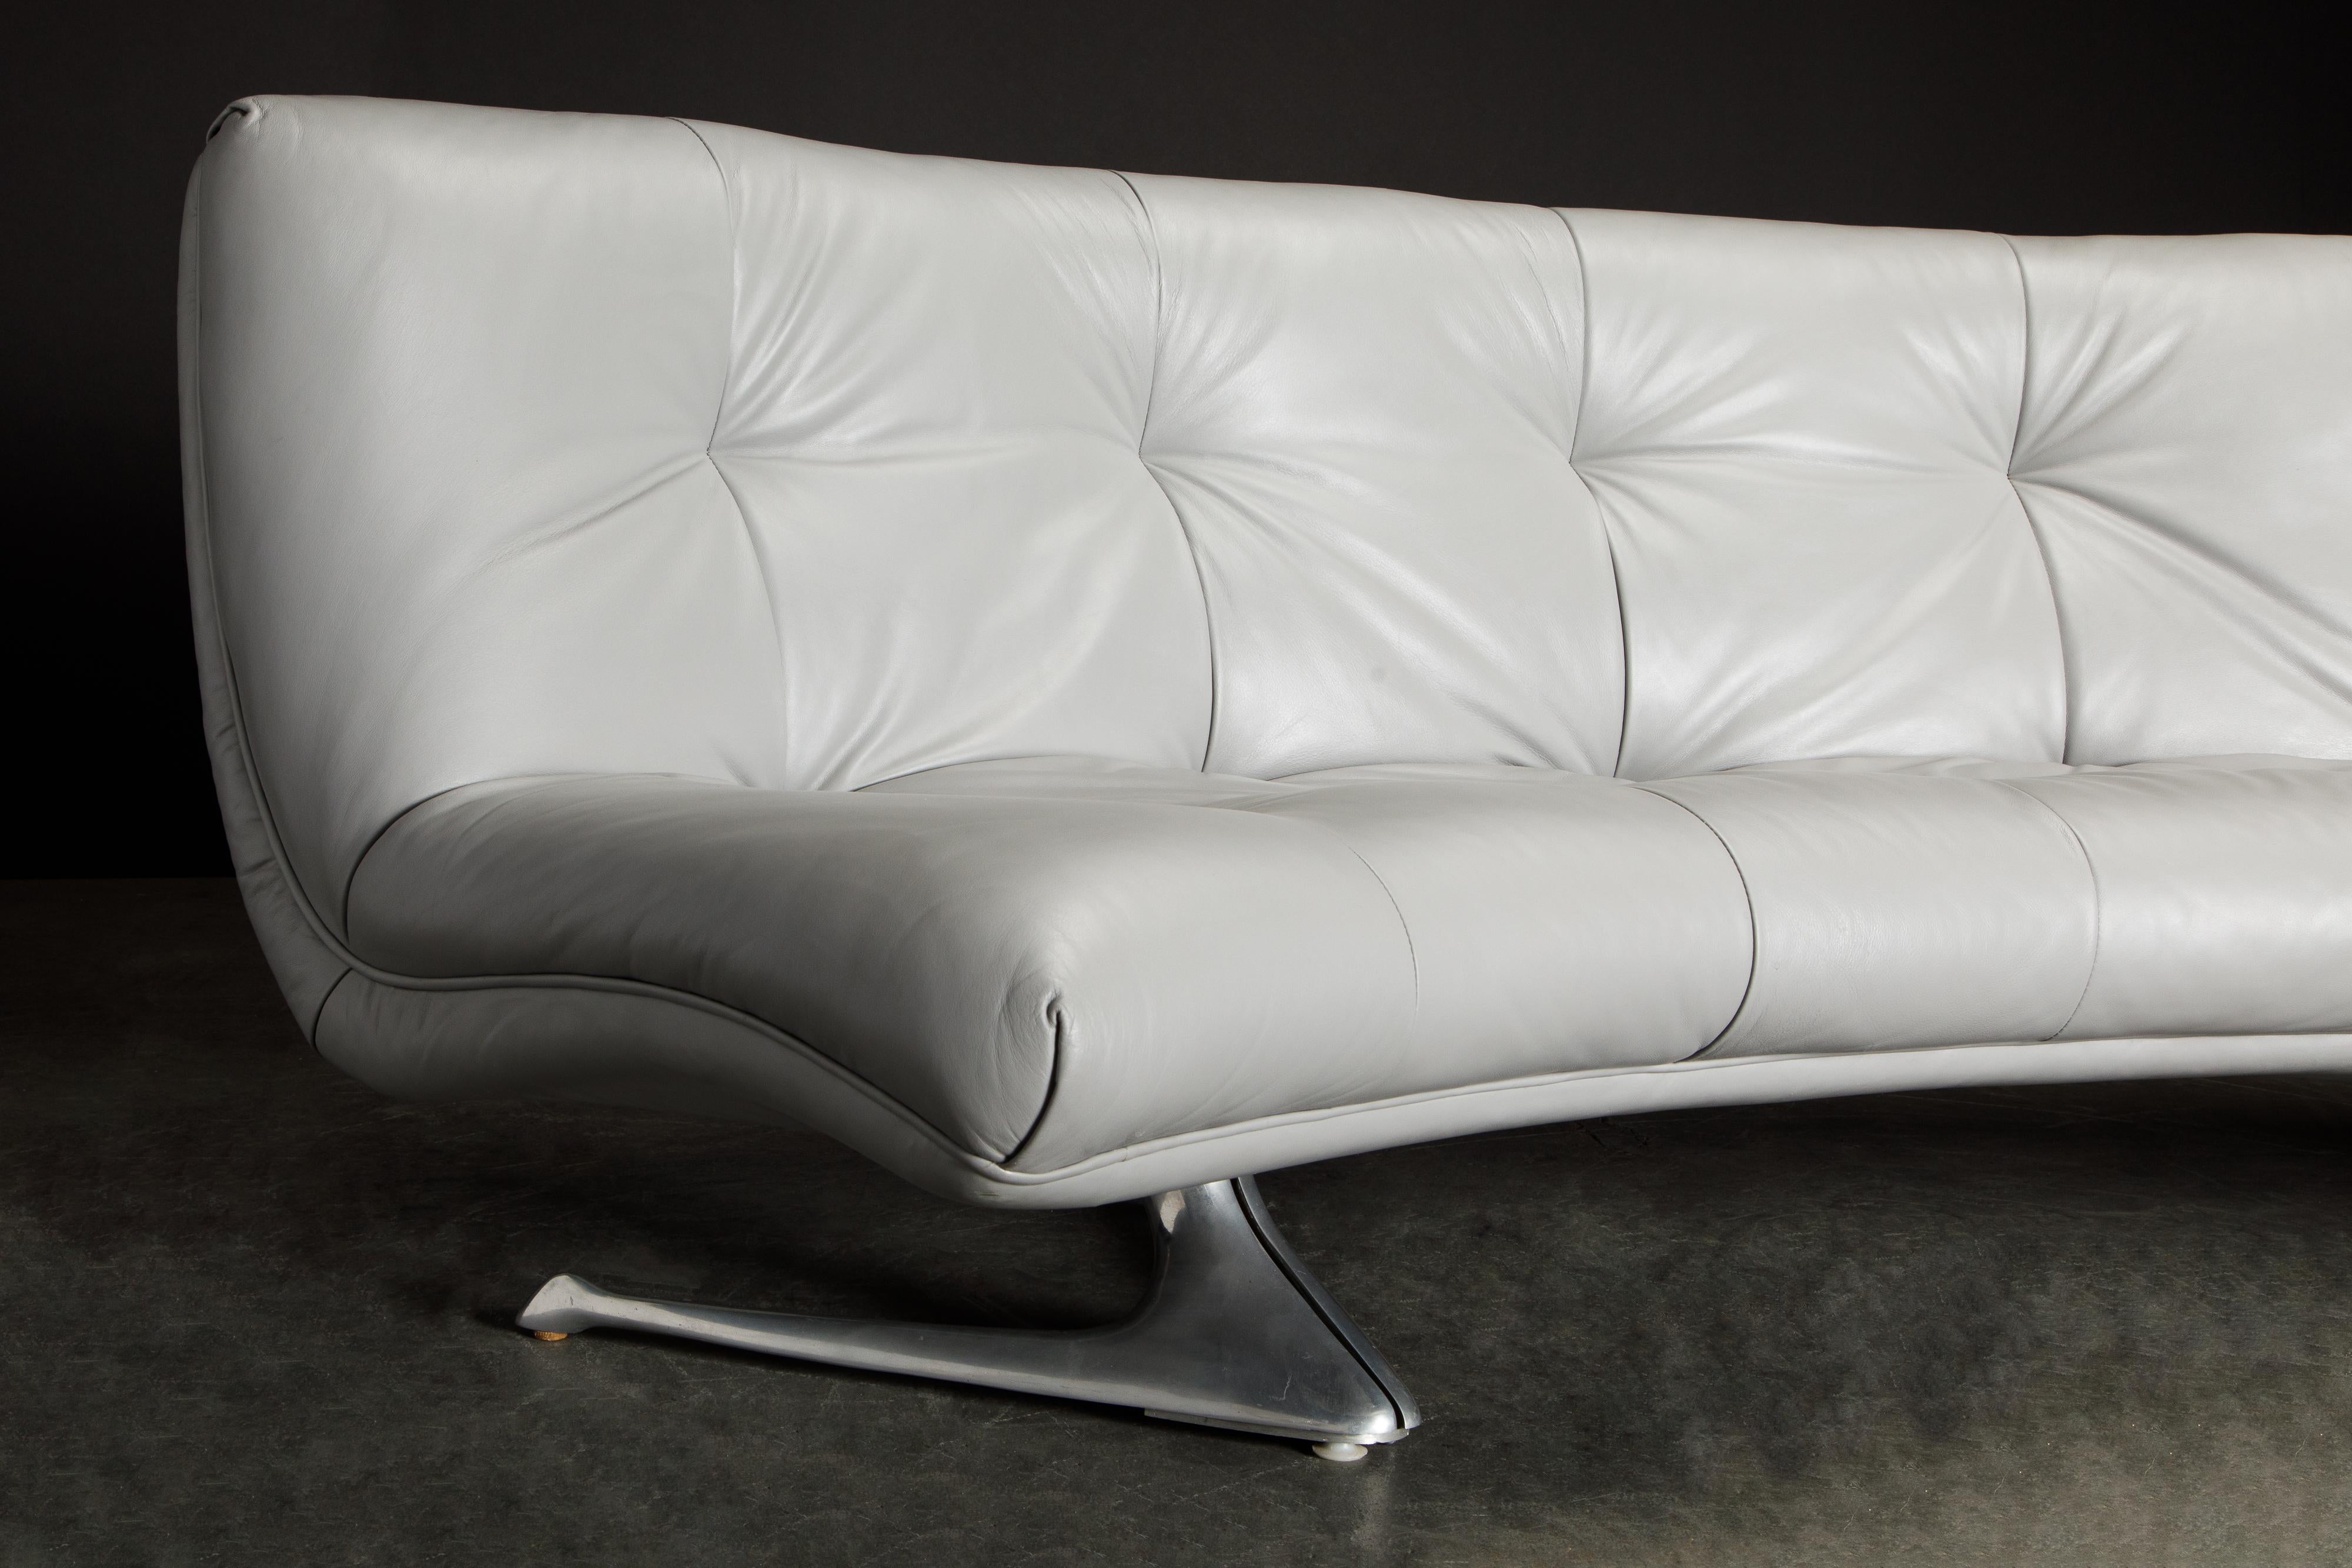 Rare 'Unicorn' Leather and Aluminum Curved Sofa by Vladimir Kagan, c. 1963 In Good Condition For Sale In Los Angeles, CA